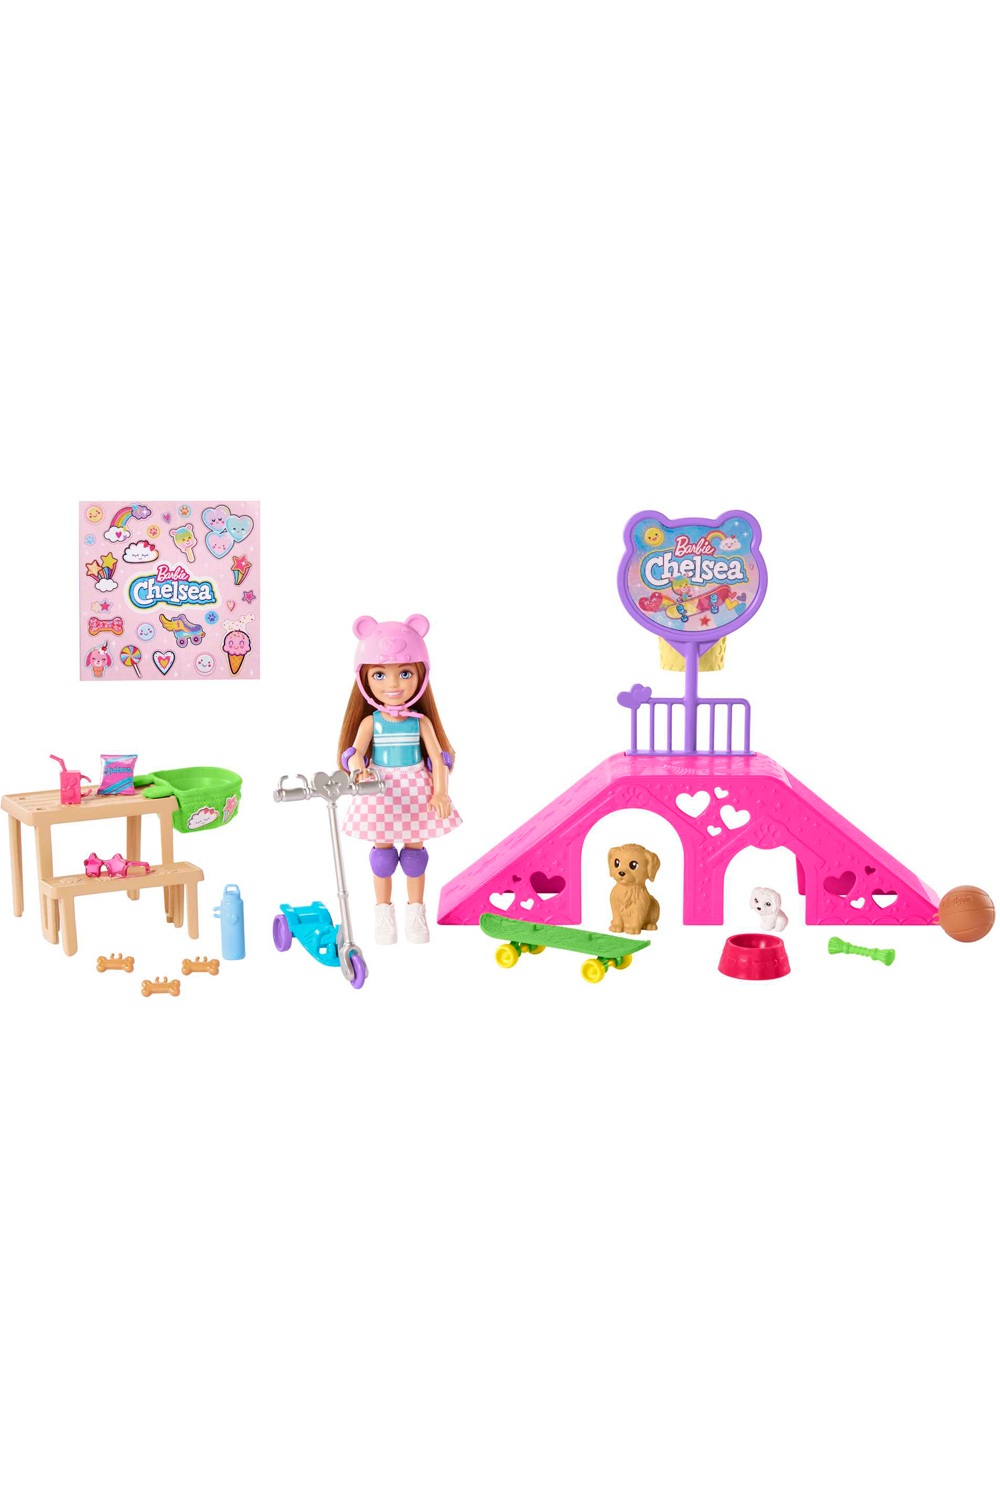 Barbie Chelsea Doll And Accessories Skatepark Playset | Doll